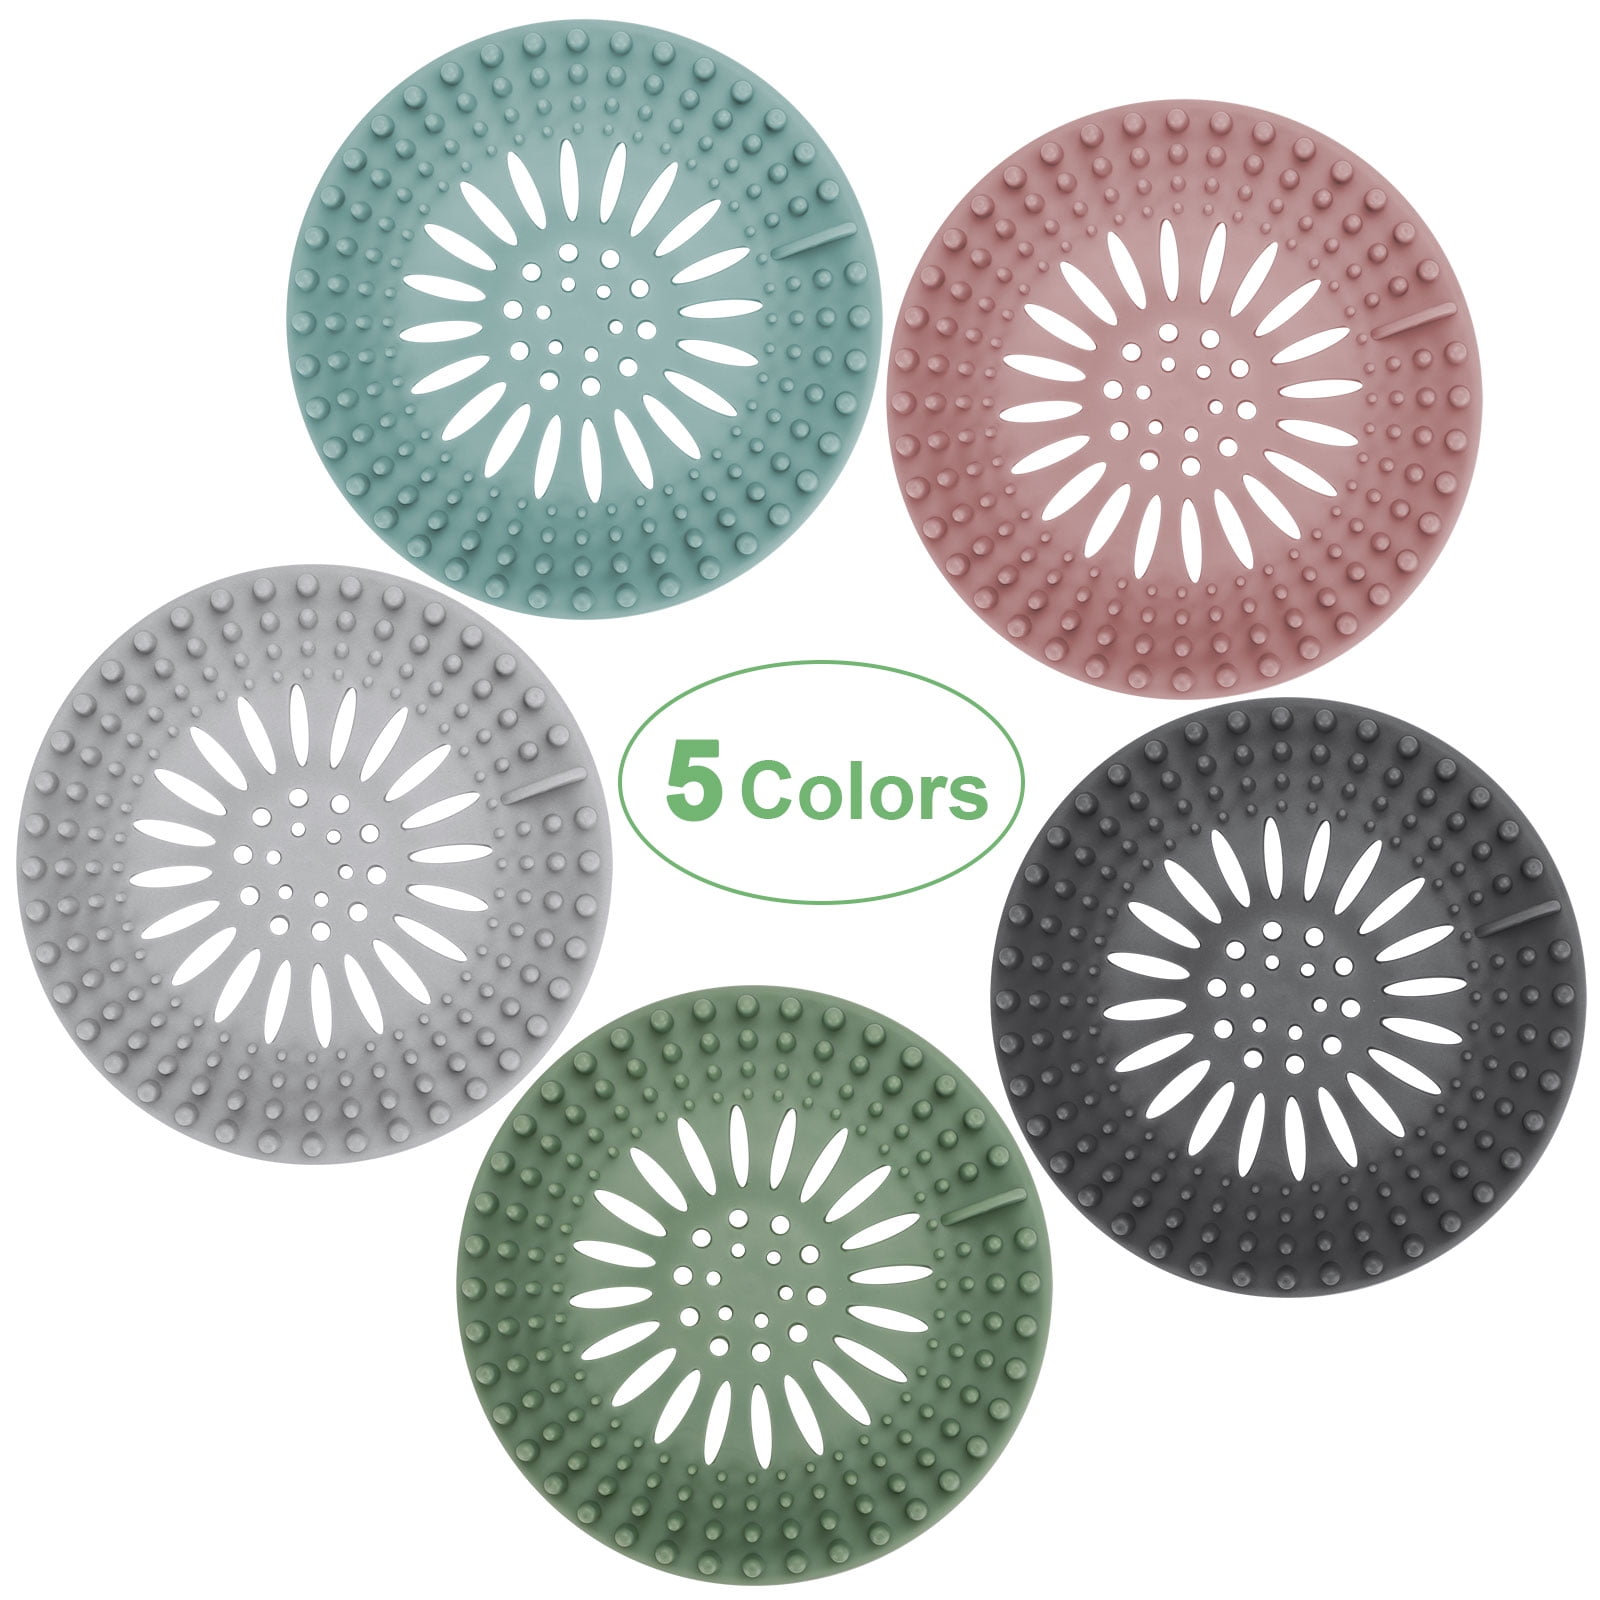 VONTER Disposable Sink Strainer 60PCS Hair Stoppers Catchers